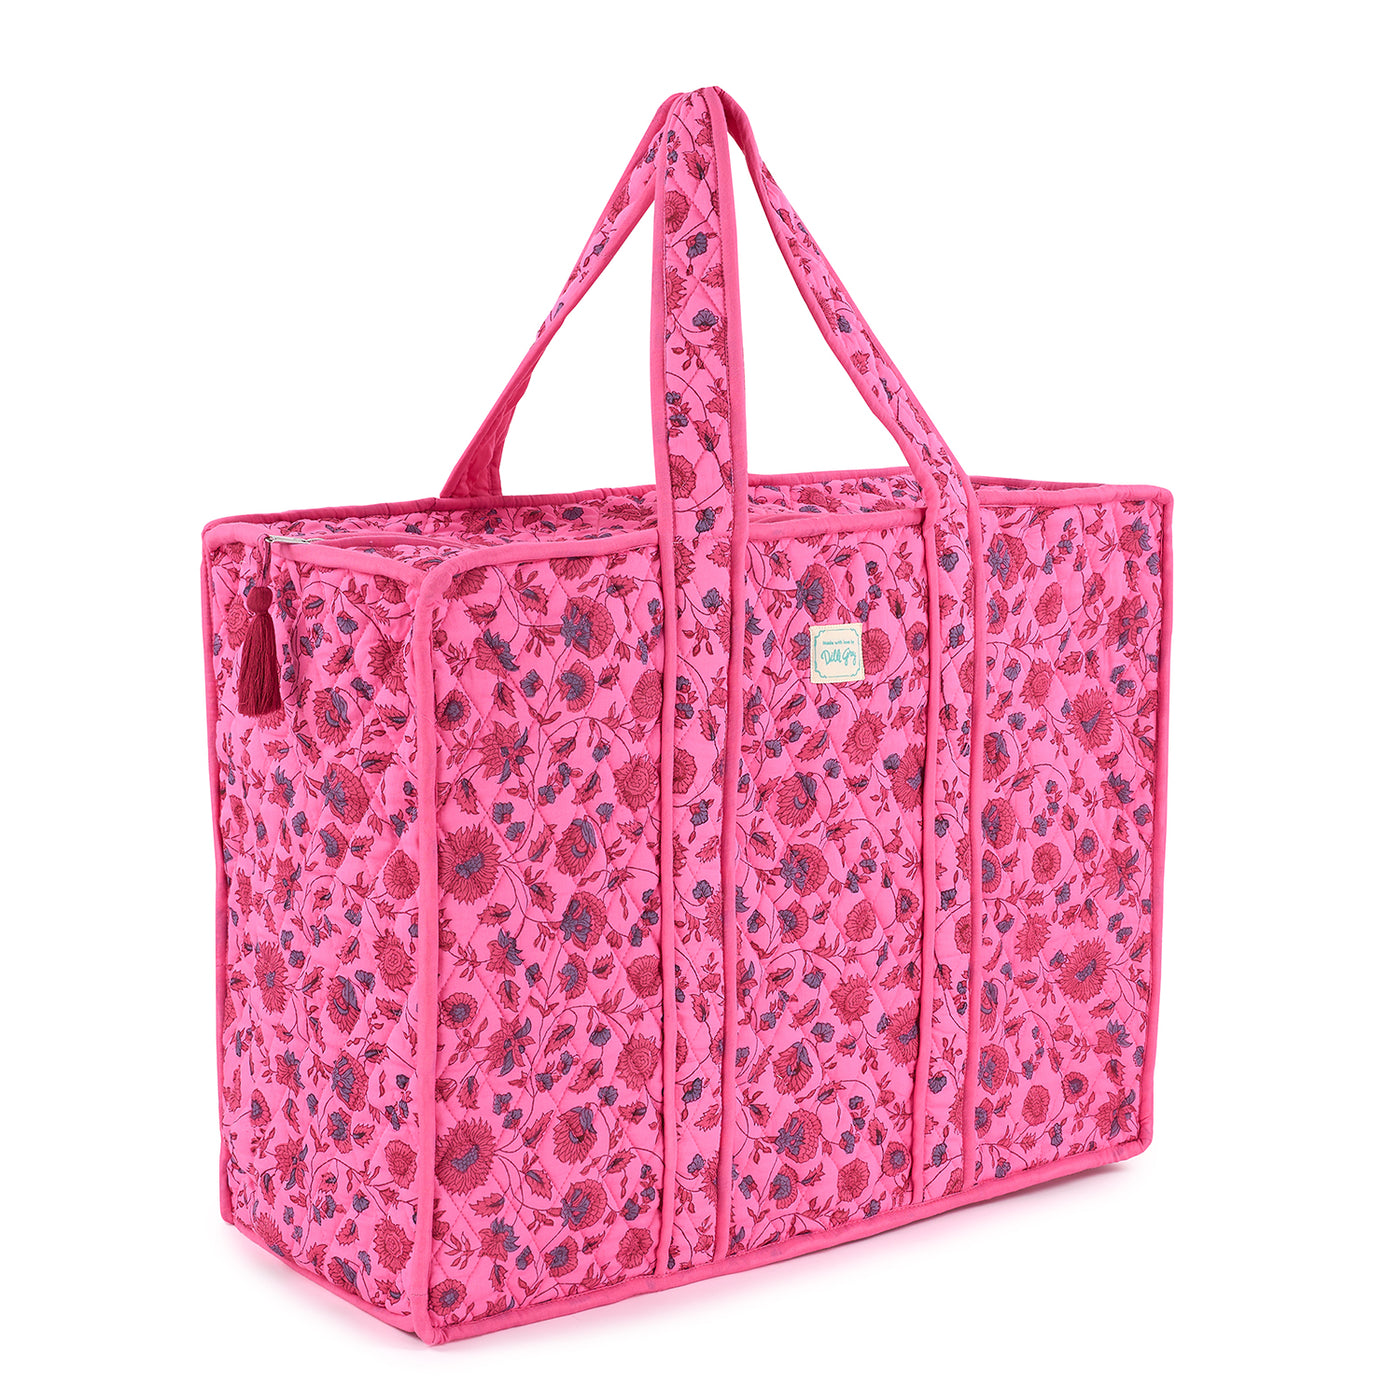 Bianca Quilted Shopper in Rani Pink